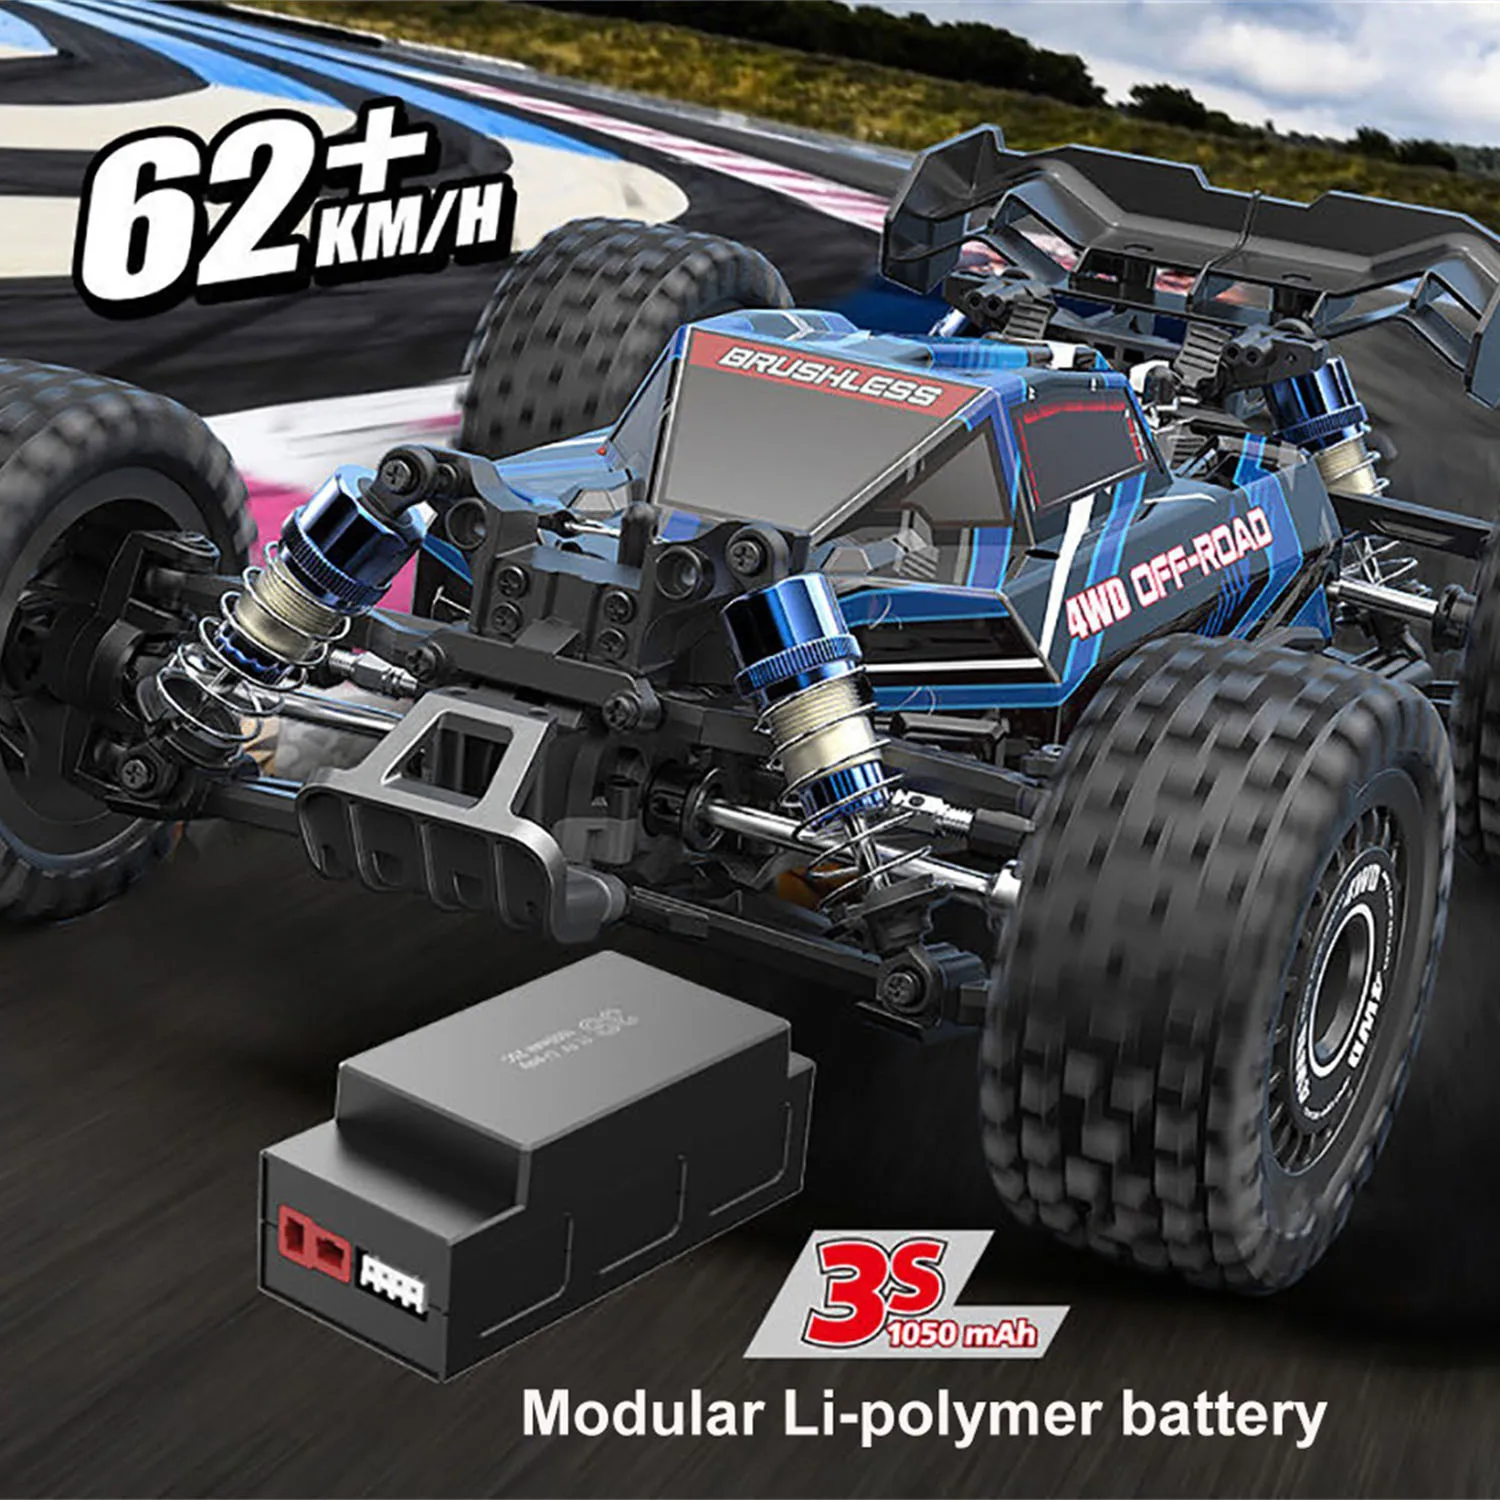 

Mjx Hyper Go 16207/16208/16209/16210 1/16 Brushless Rc Car 2.4g Gps Remote Control Toy Truck 4wd 65kmh High-speed Off-road Buggy